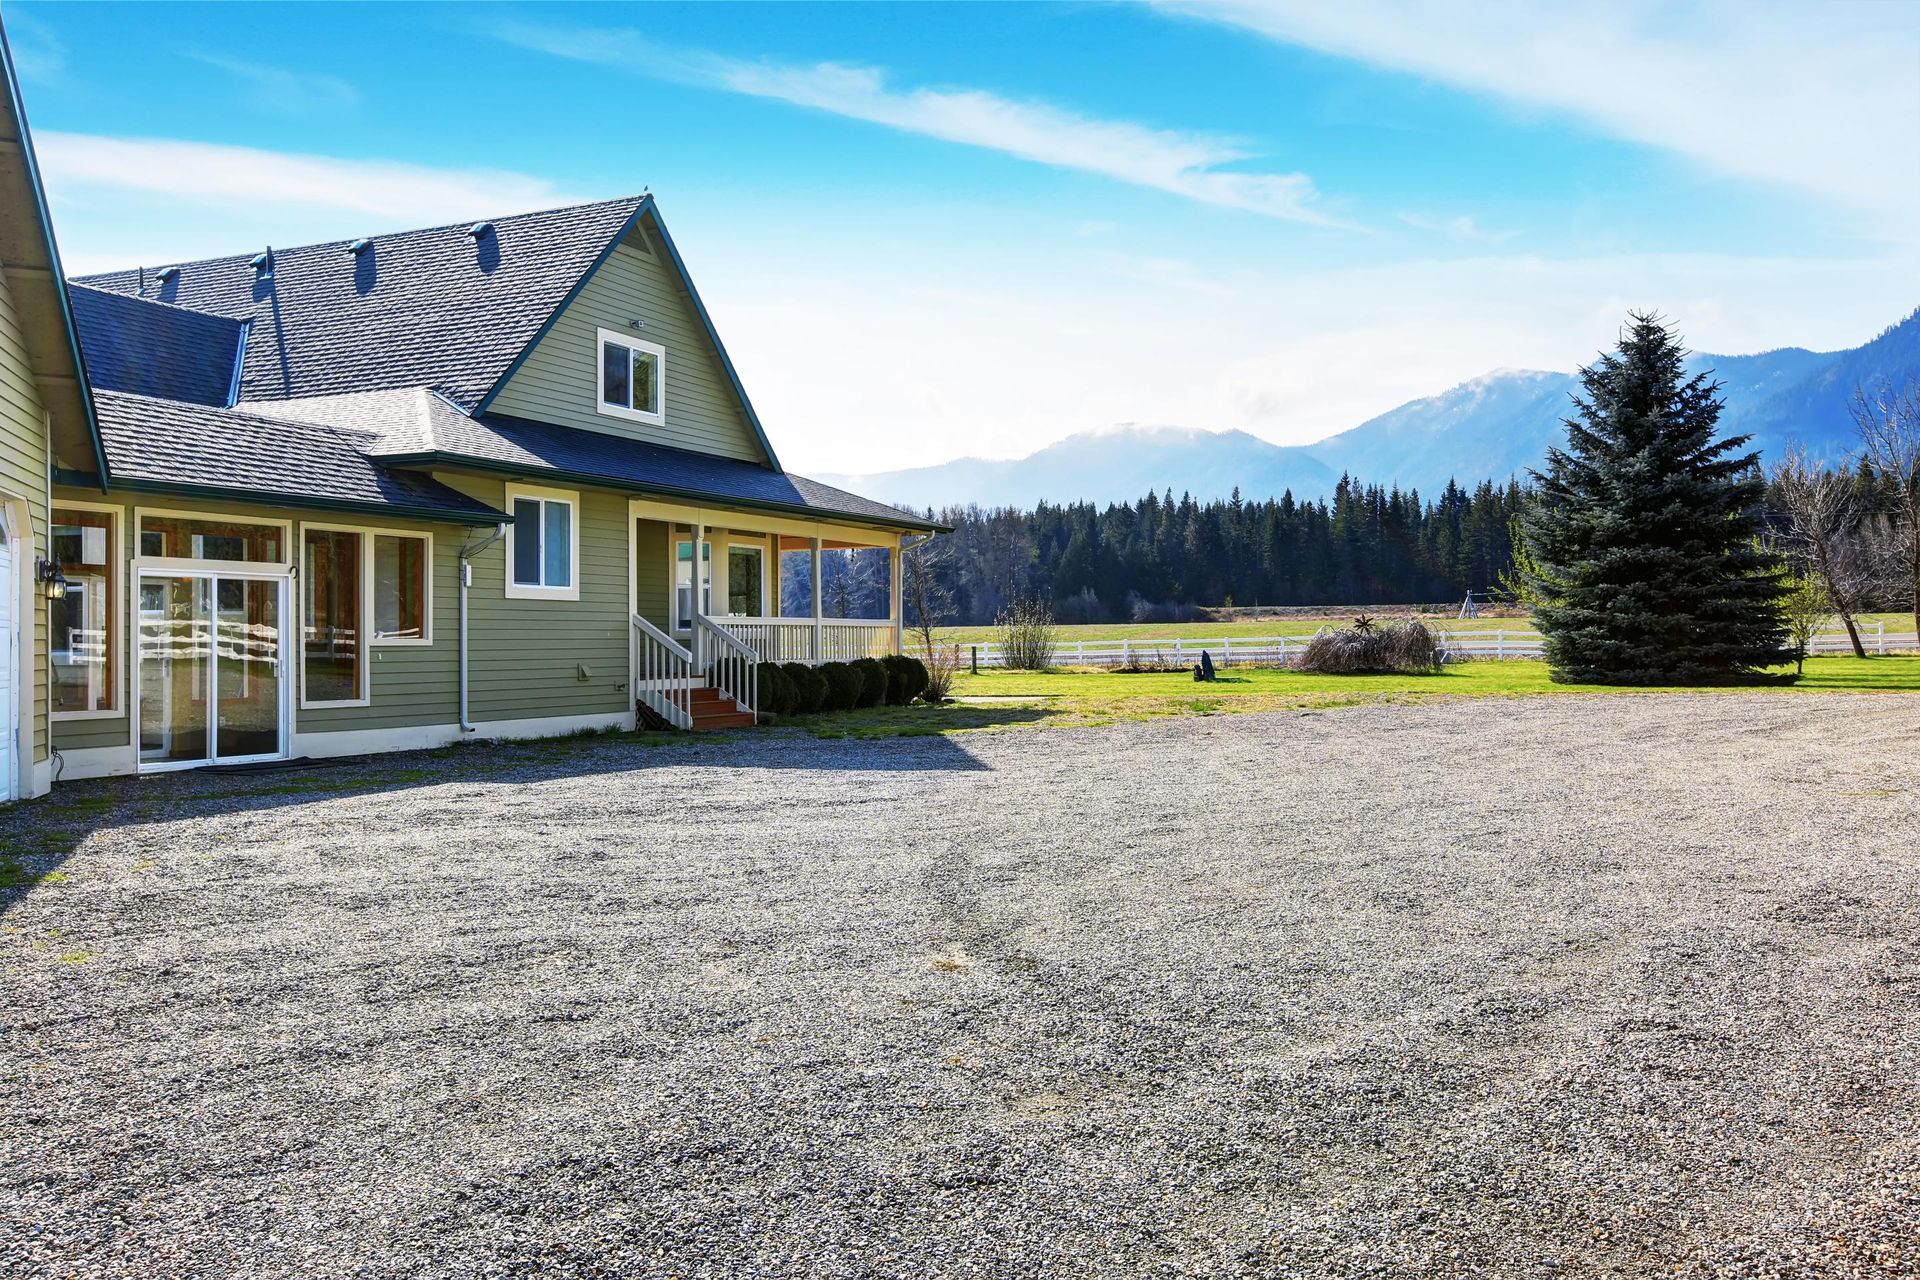 A large house with a gravel driveway in front of it.